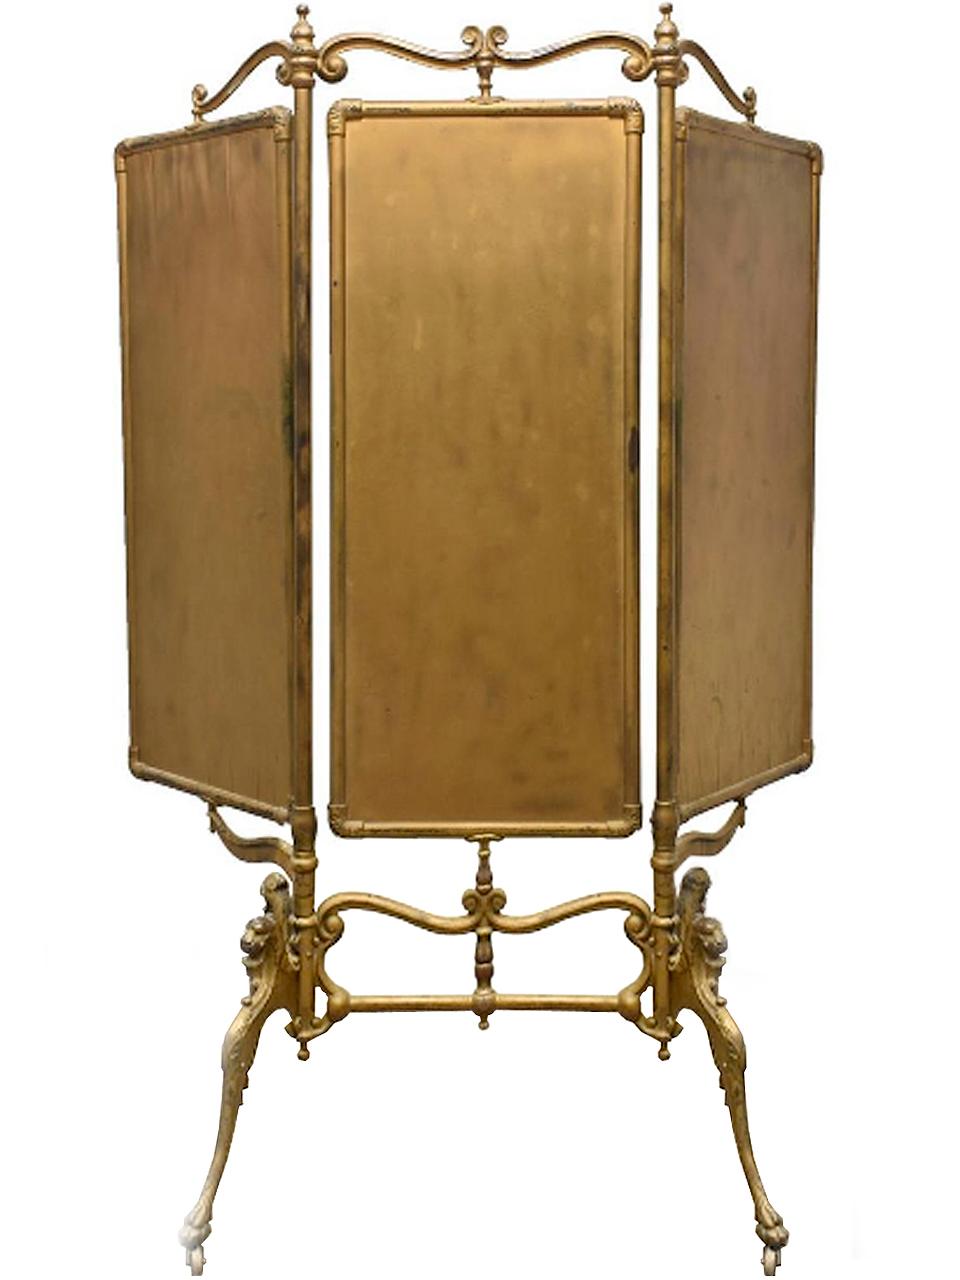 This French triple fold iron dressing mirror is finished in worn gilt paint and beveled mirror plates, rising on the griffin stand with paw feet on casters. I always thought that this was the most beautiful and desirable mirrors. The aged patina is